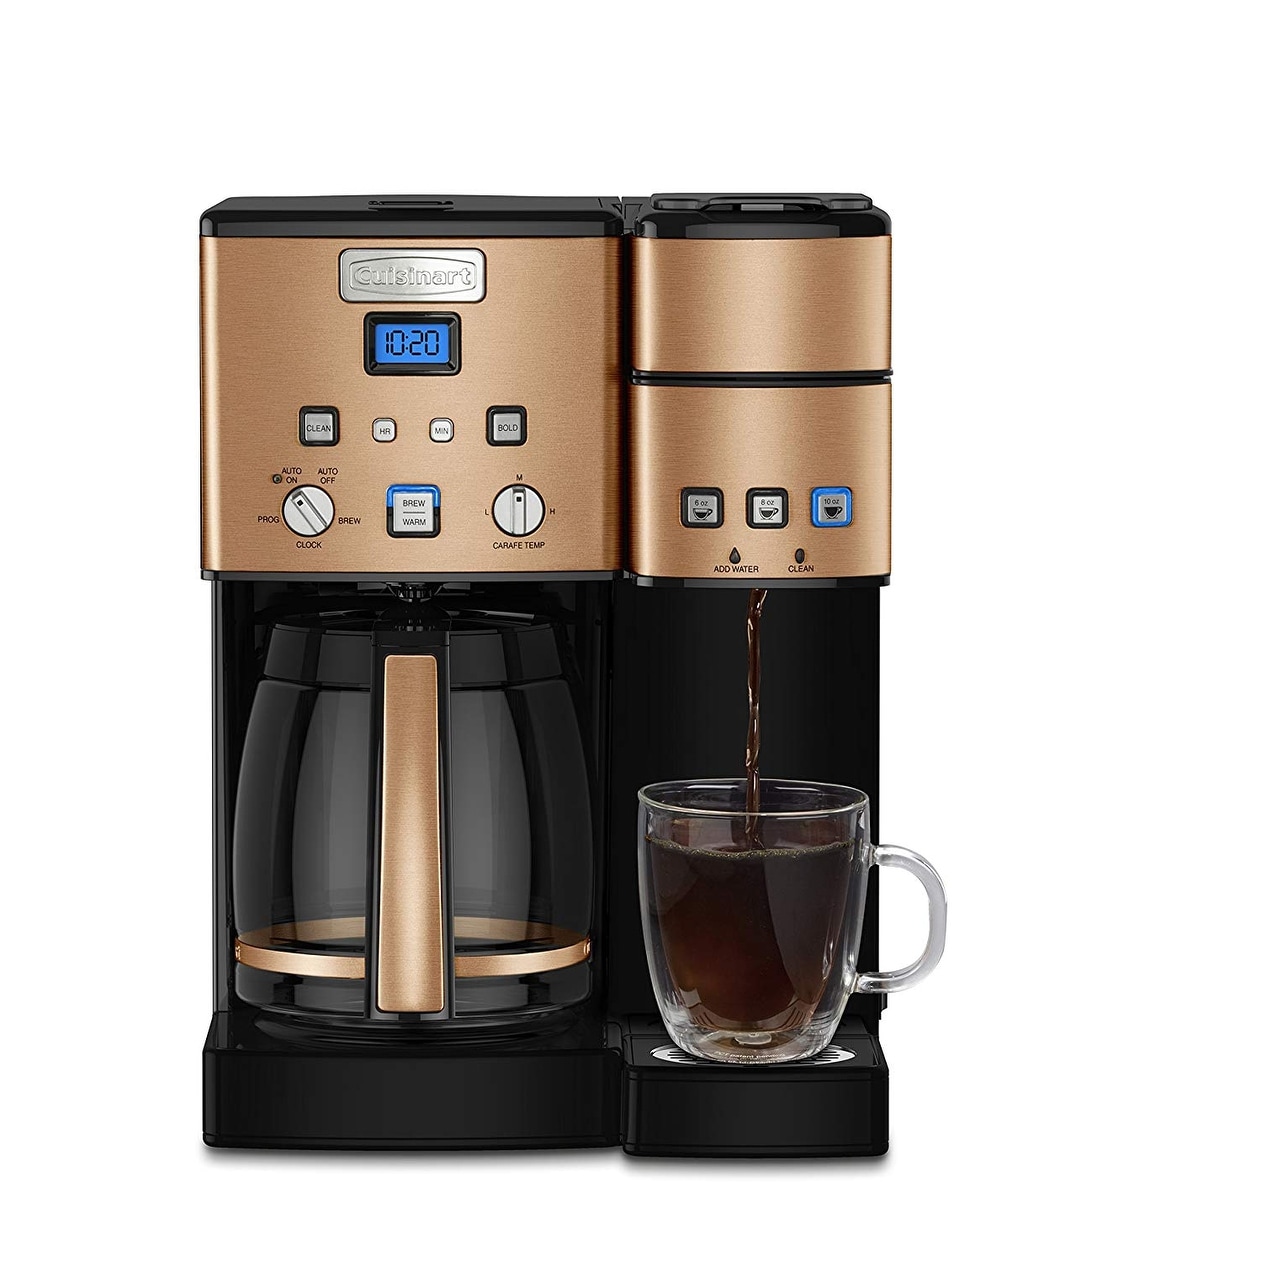 https://ak1.ostkcdn.com/images/products/is/images/direct/e713bd855c93a38e3f45dfed83fd71c14f8f4a85/Cuisinart-SS-15CP-12-Cup-Coffee-Maker-And-Single-Serve-Brewer%2C-Copper.jpg